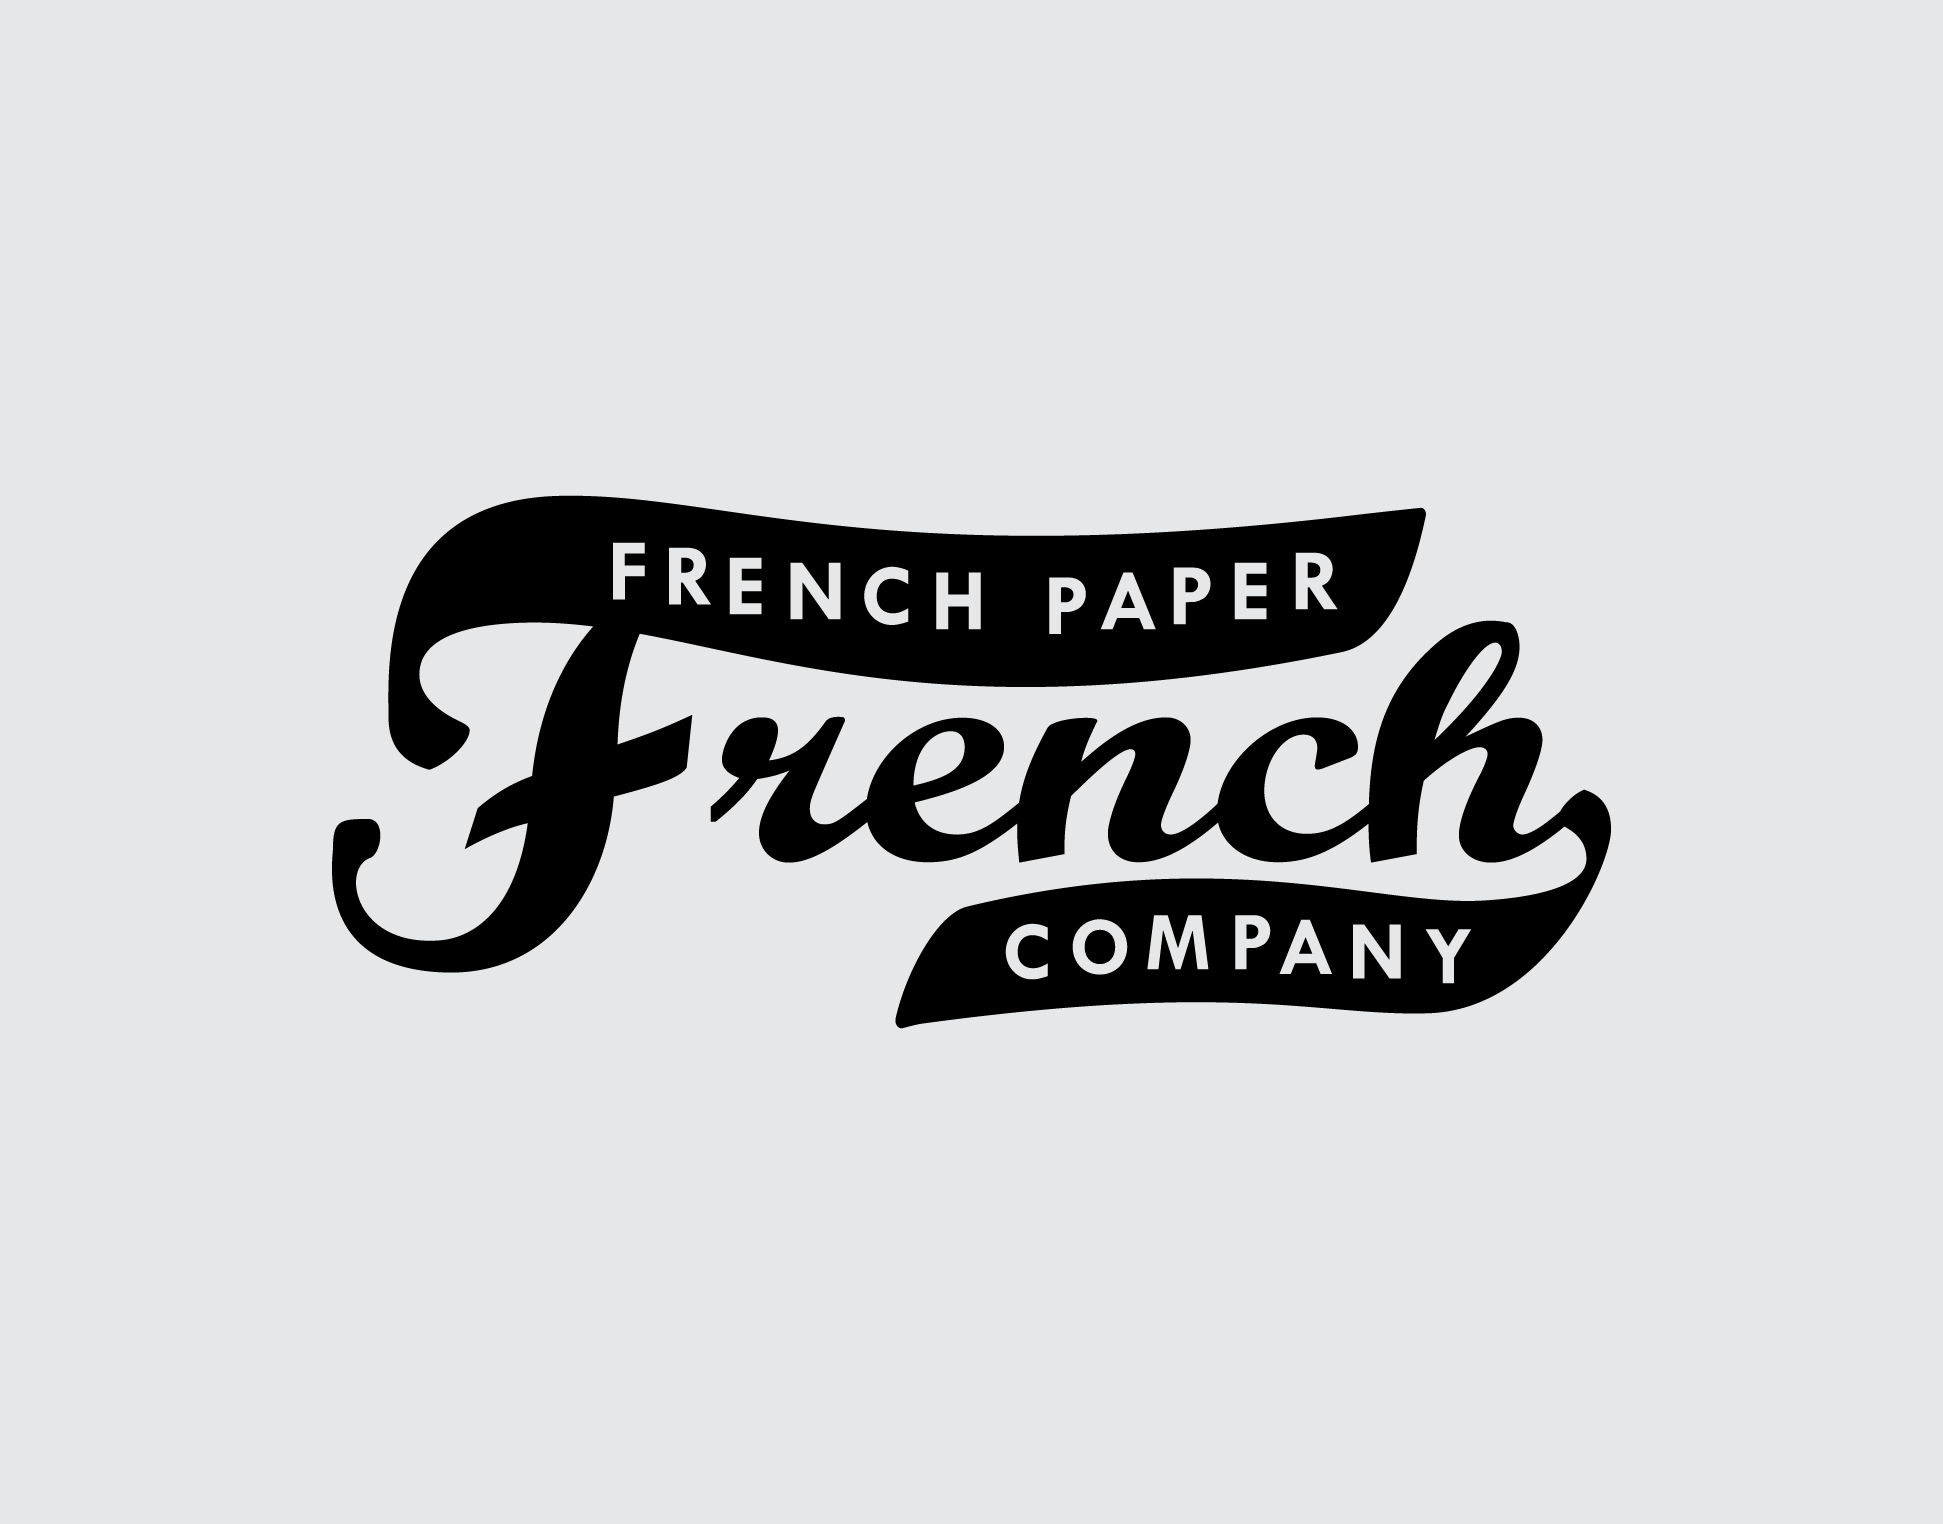 French Company Logo - About French Paper